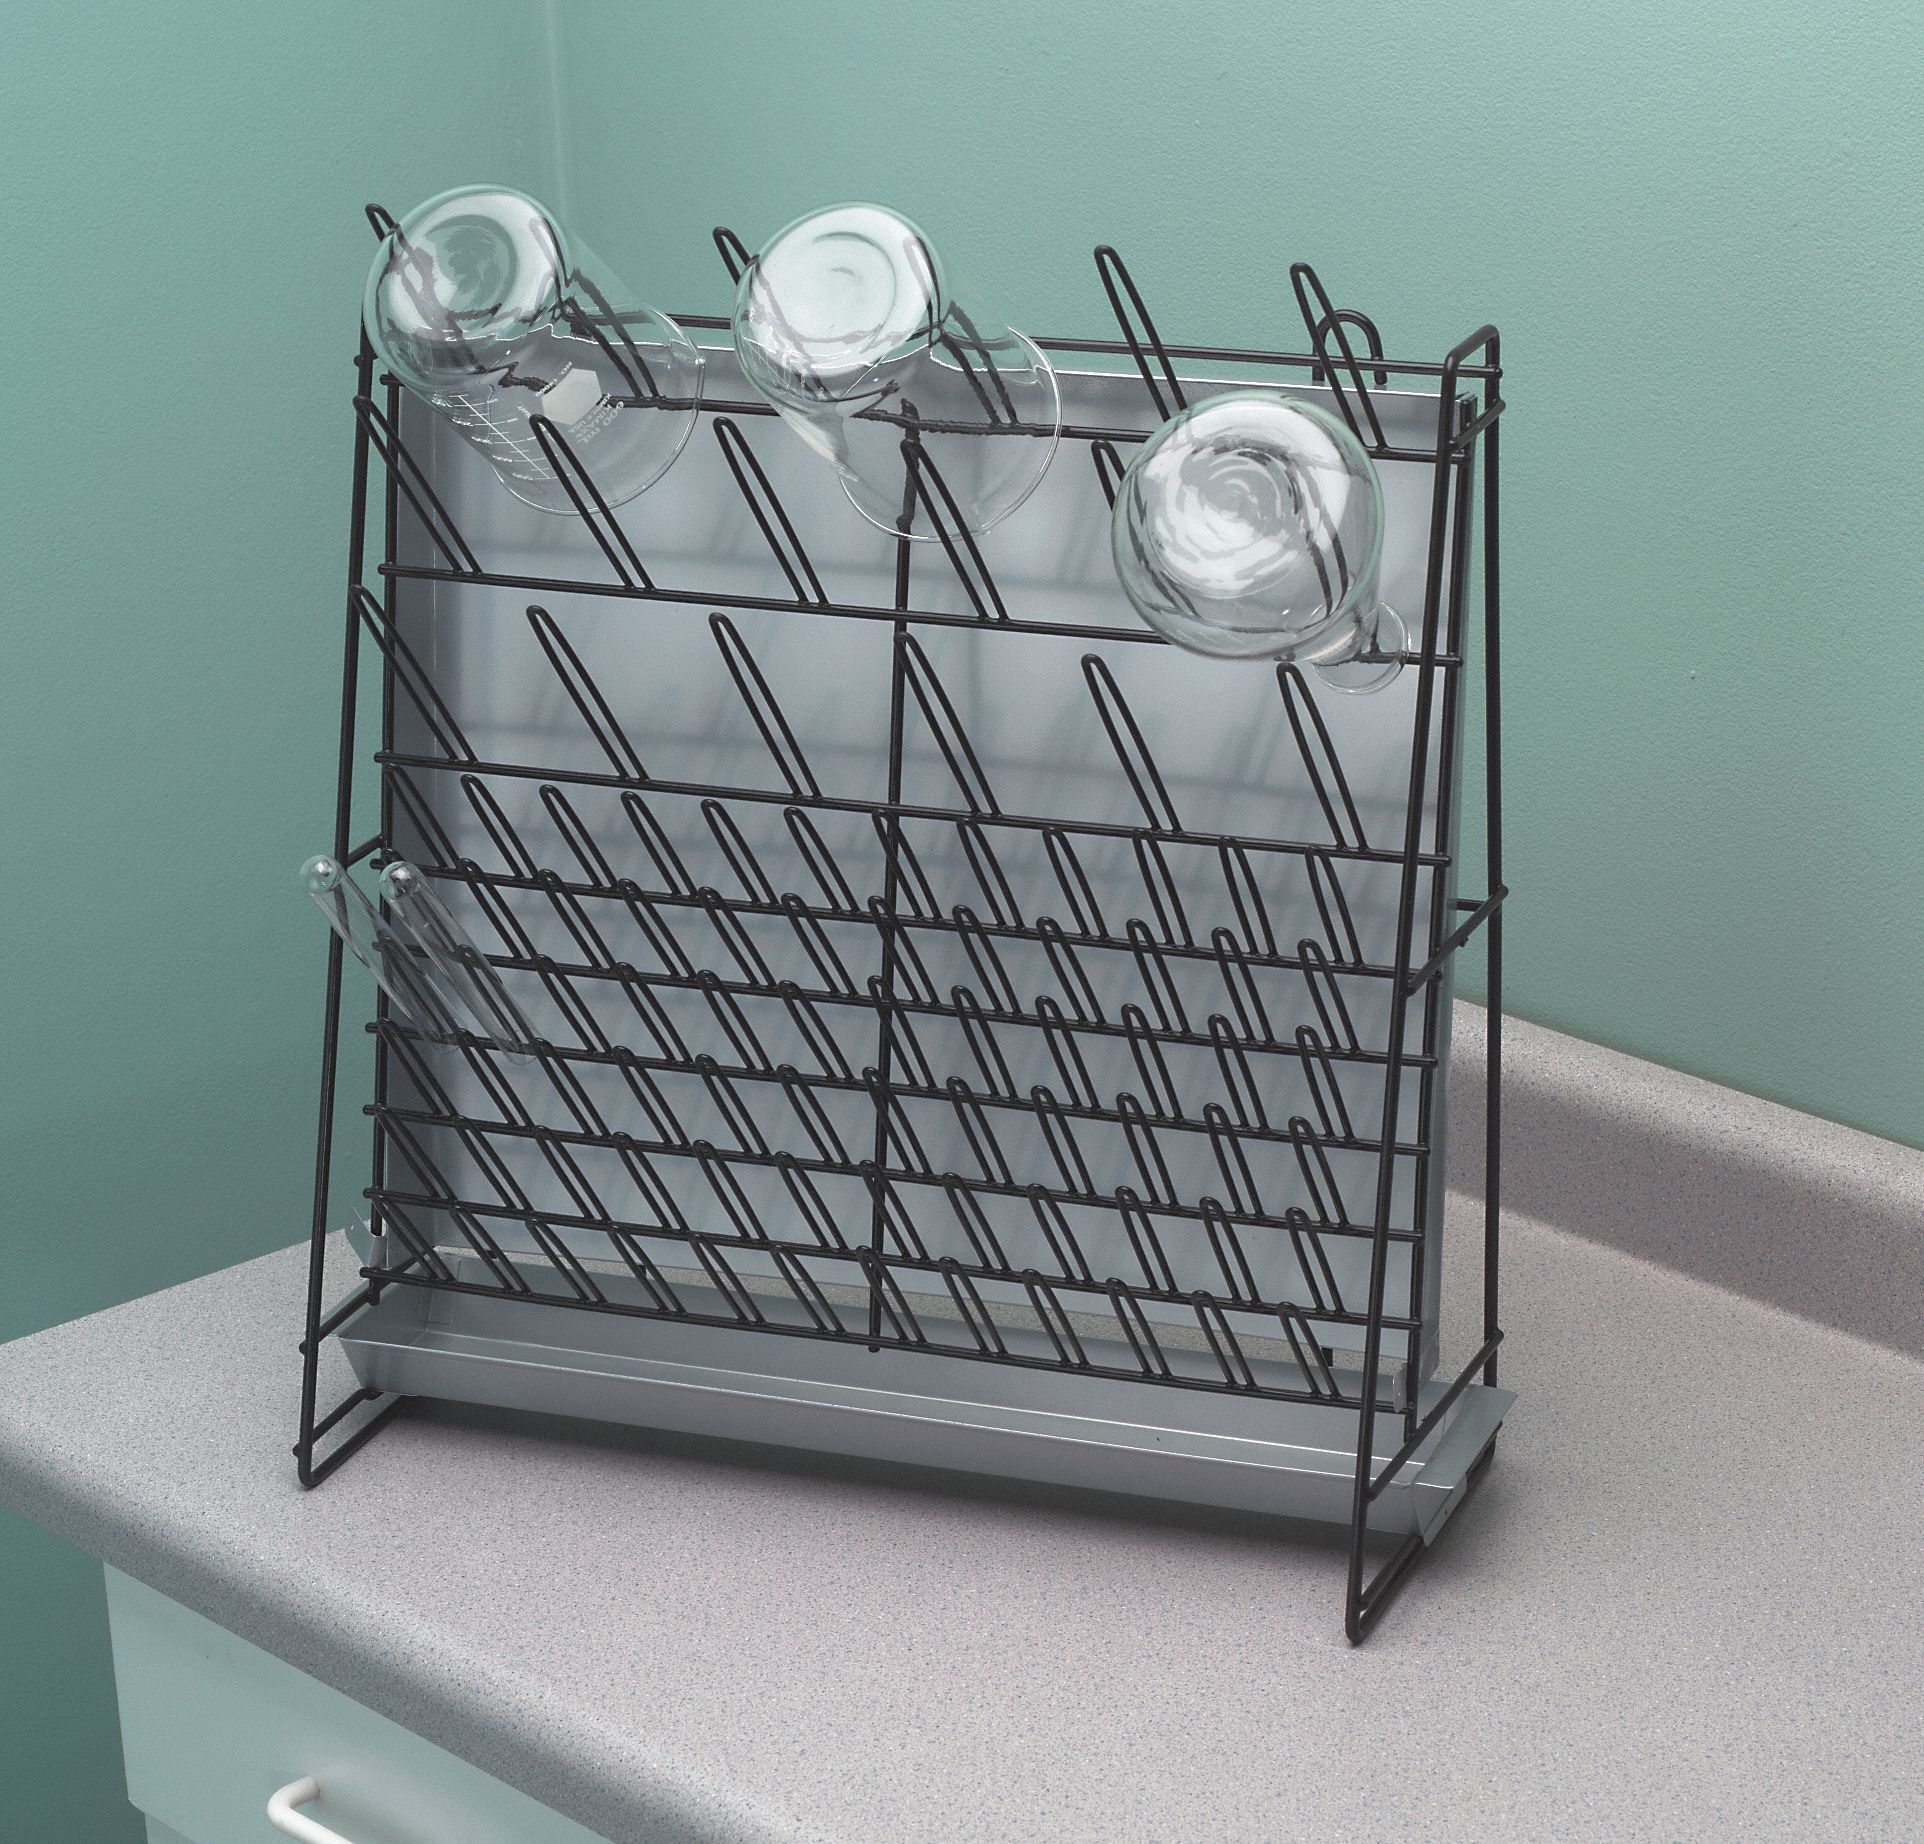 Vinyl-Coated Steel Wire Construction Self-Standing or Wall-Mountable L x W x H Heathrow Scientific HS23243A Glassware Drying Rack 462 x 182 x 525mm